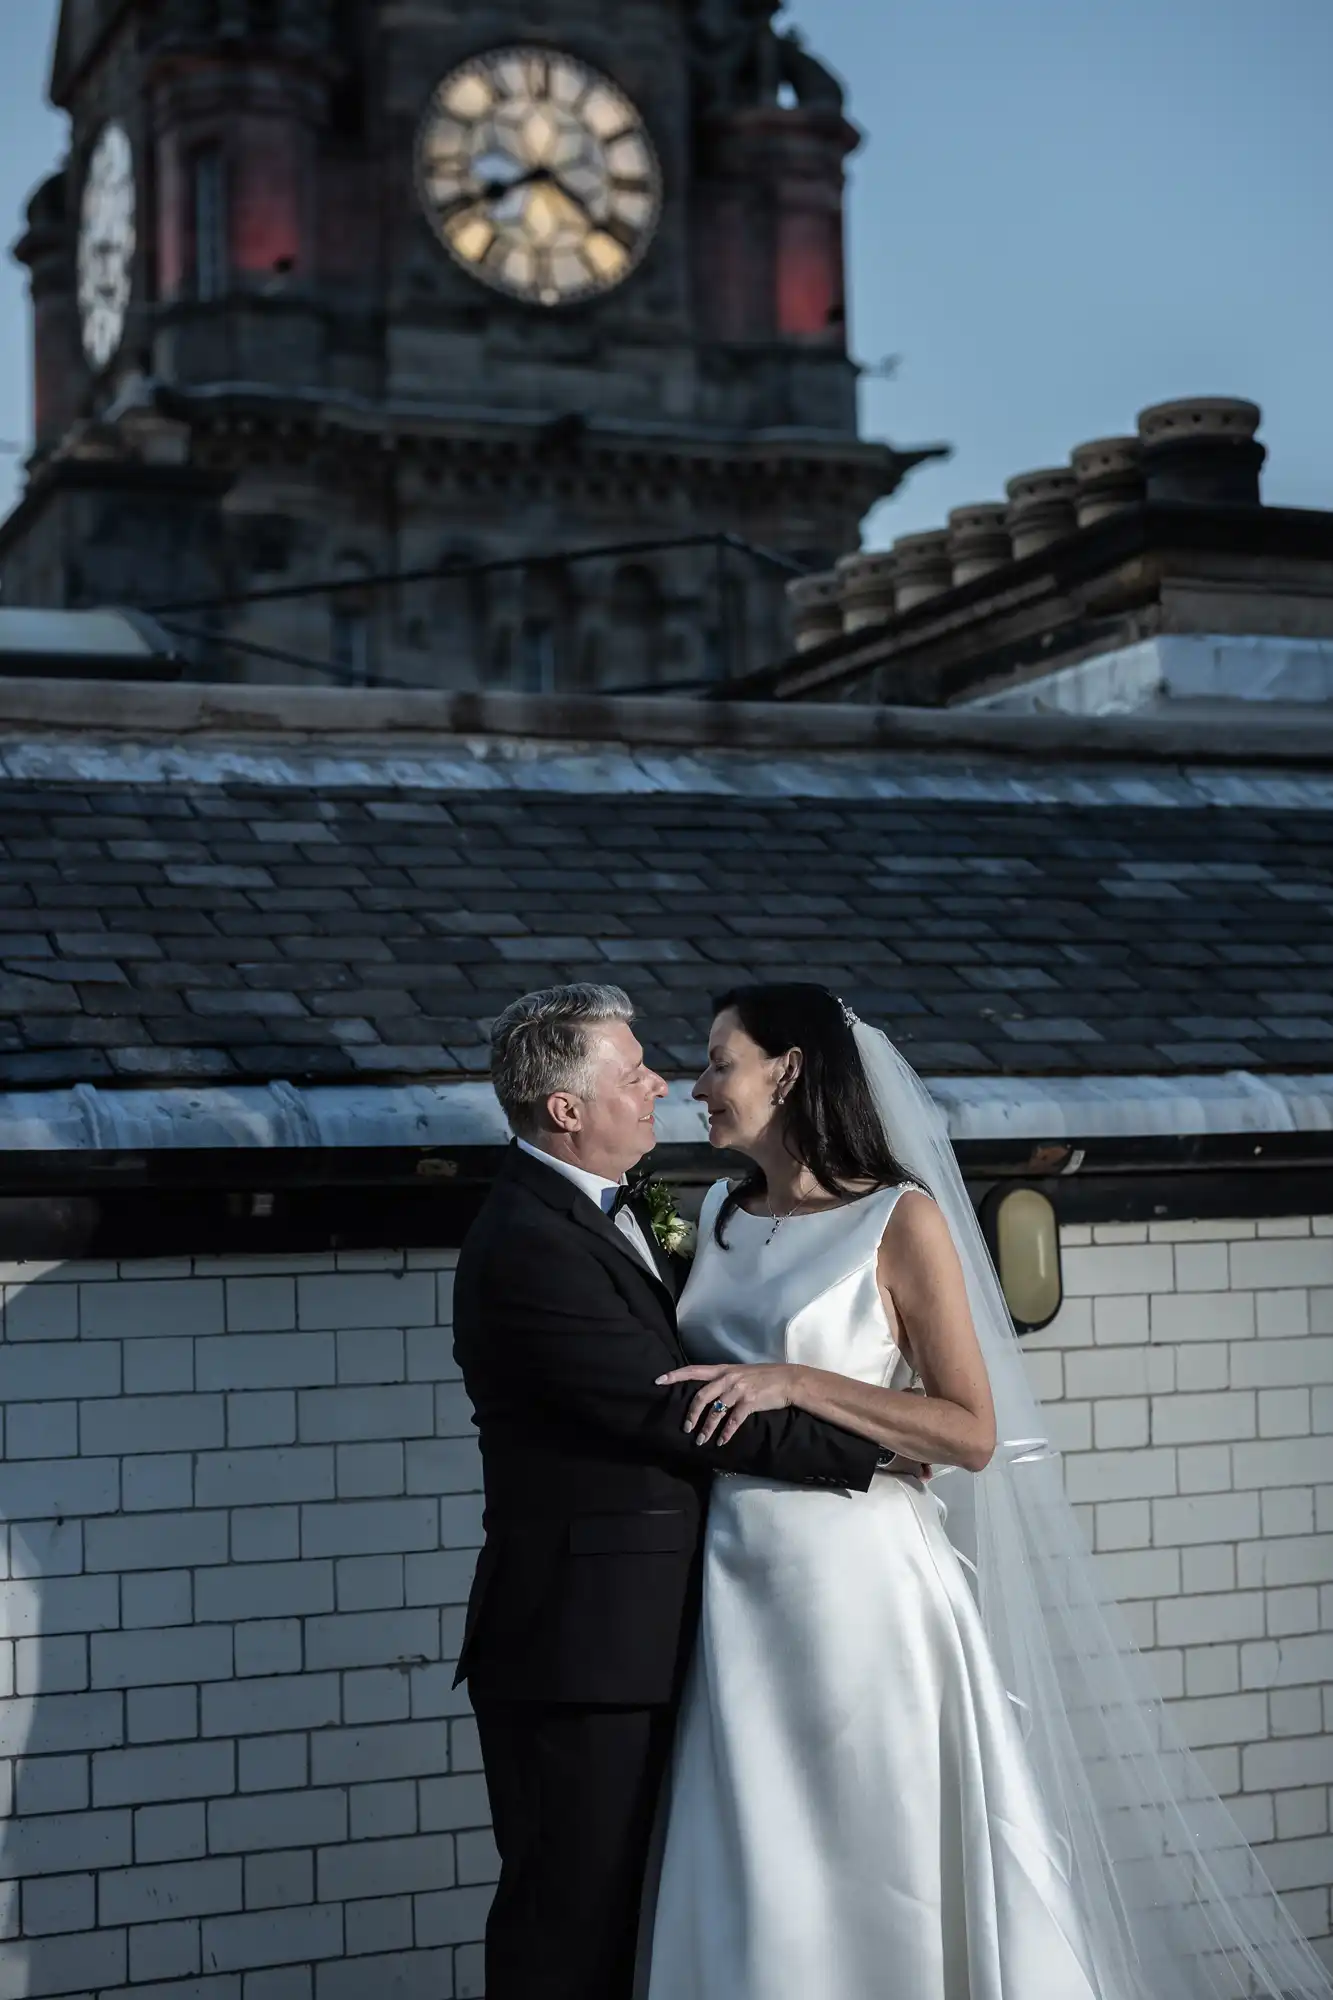 A bride and groom share a moment, standing close together with a historical clock tower in the soft-lit background.